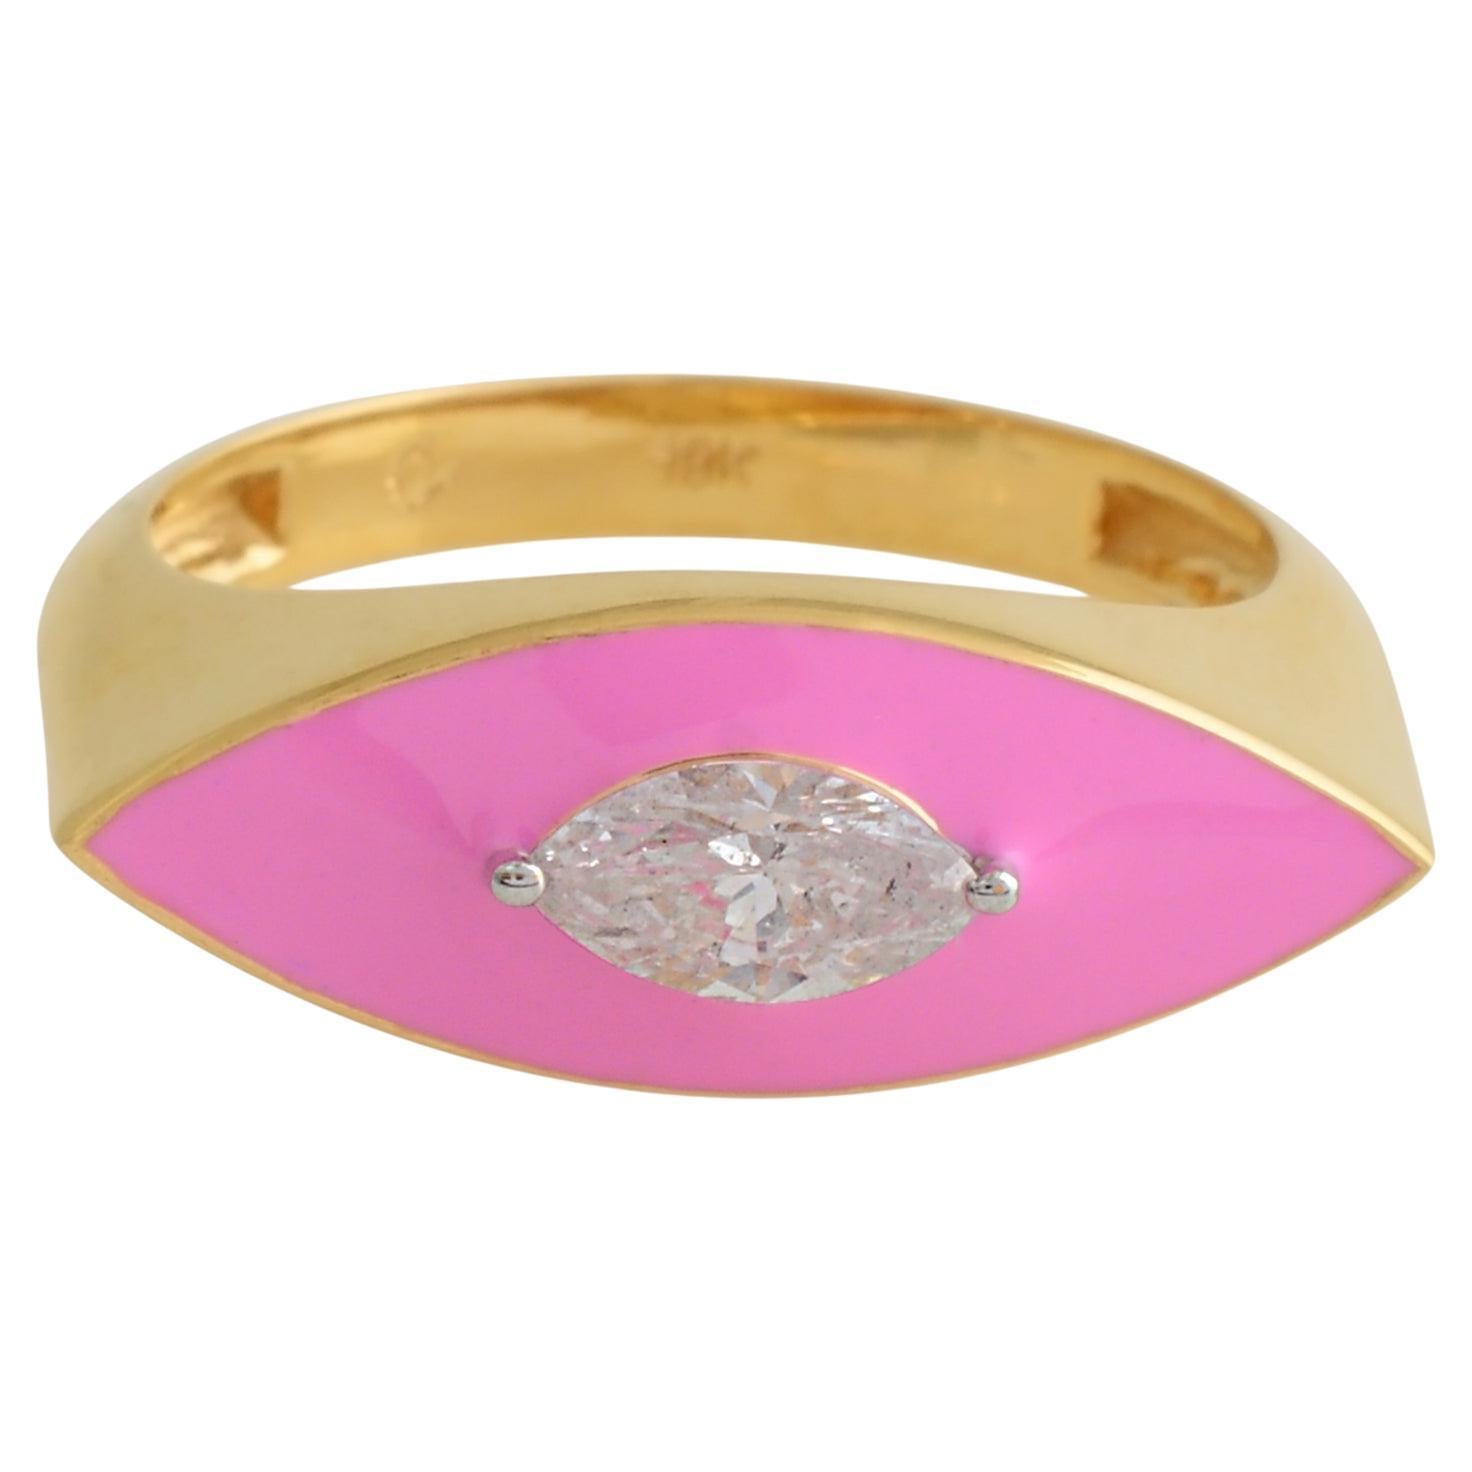 0.38 Carat Solitaire Diamond Evil Eye Ring 18k Yellow Gold Pink Enamel Jewelry For Sale